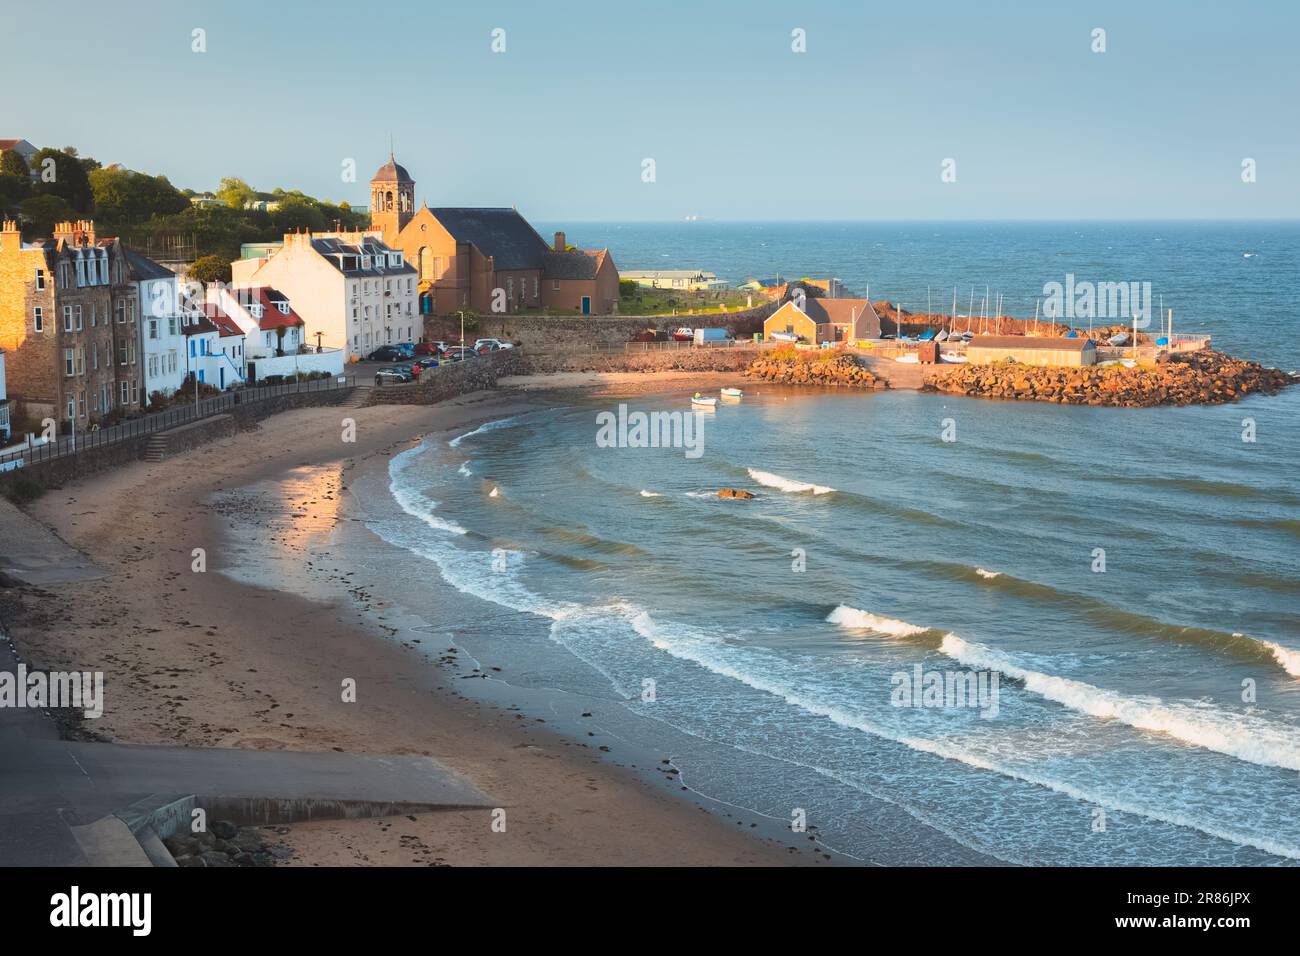 Scenic golden hour sunset view of harbour and beach at the coastal seaside fishing village of Kinghorn, Fife, Scotland, UK on a summer evening. Stock Photo